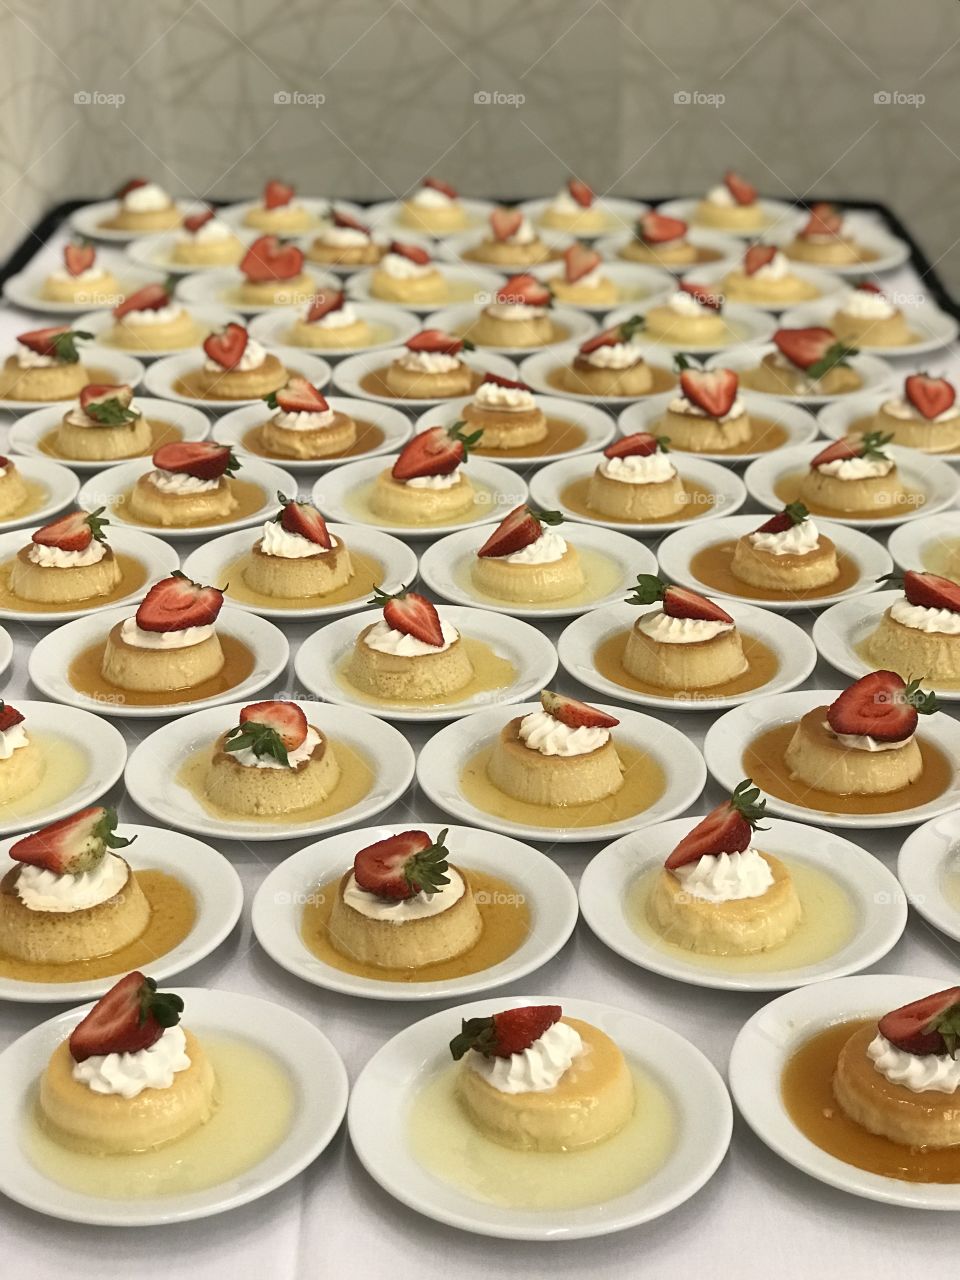 Dessert table!  Flan with strawberry and whipped cream topping.  A feast for the palate.